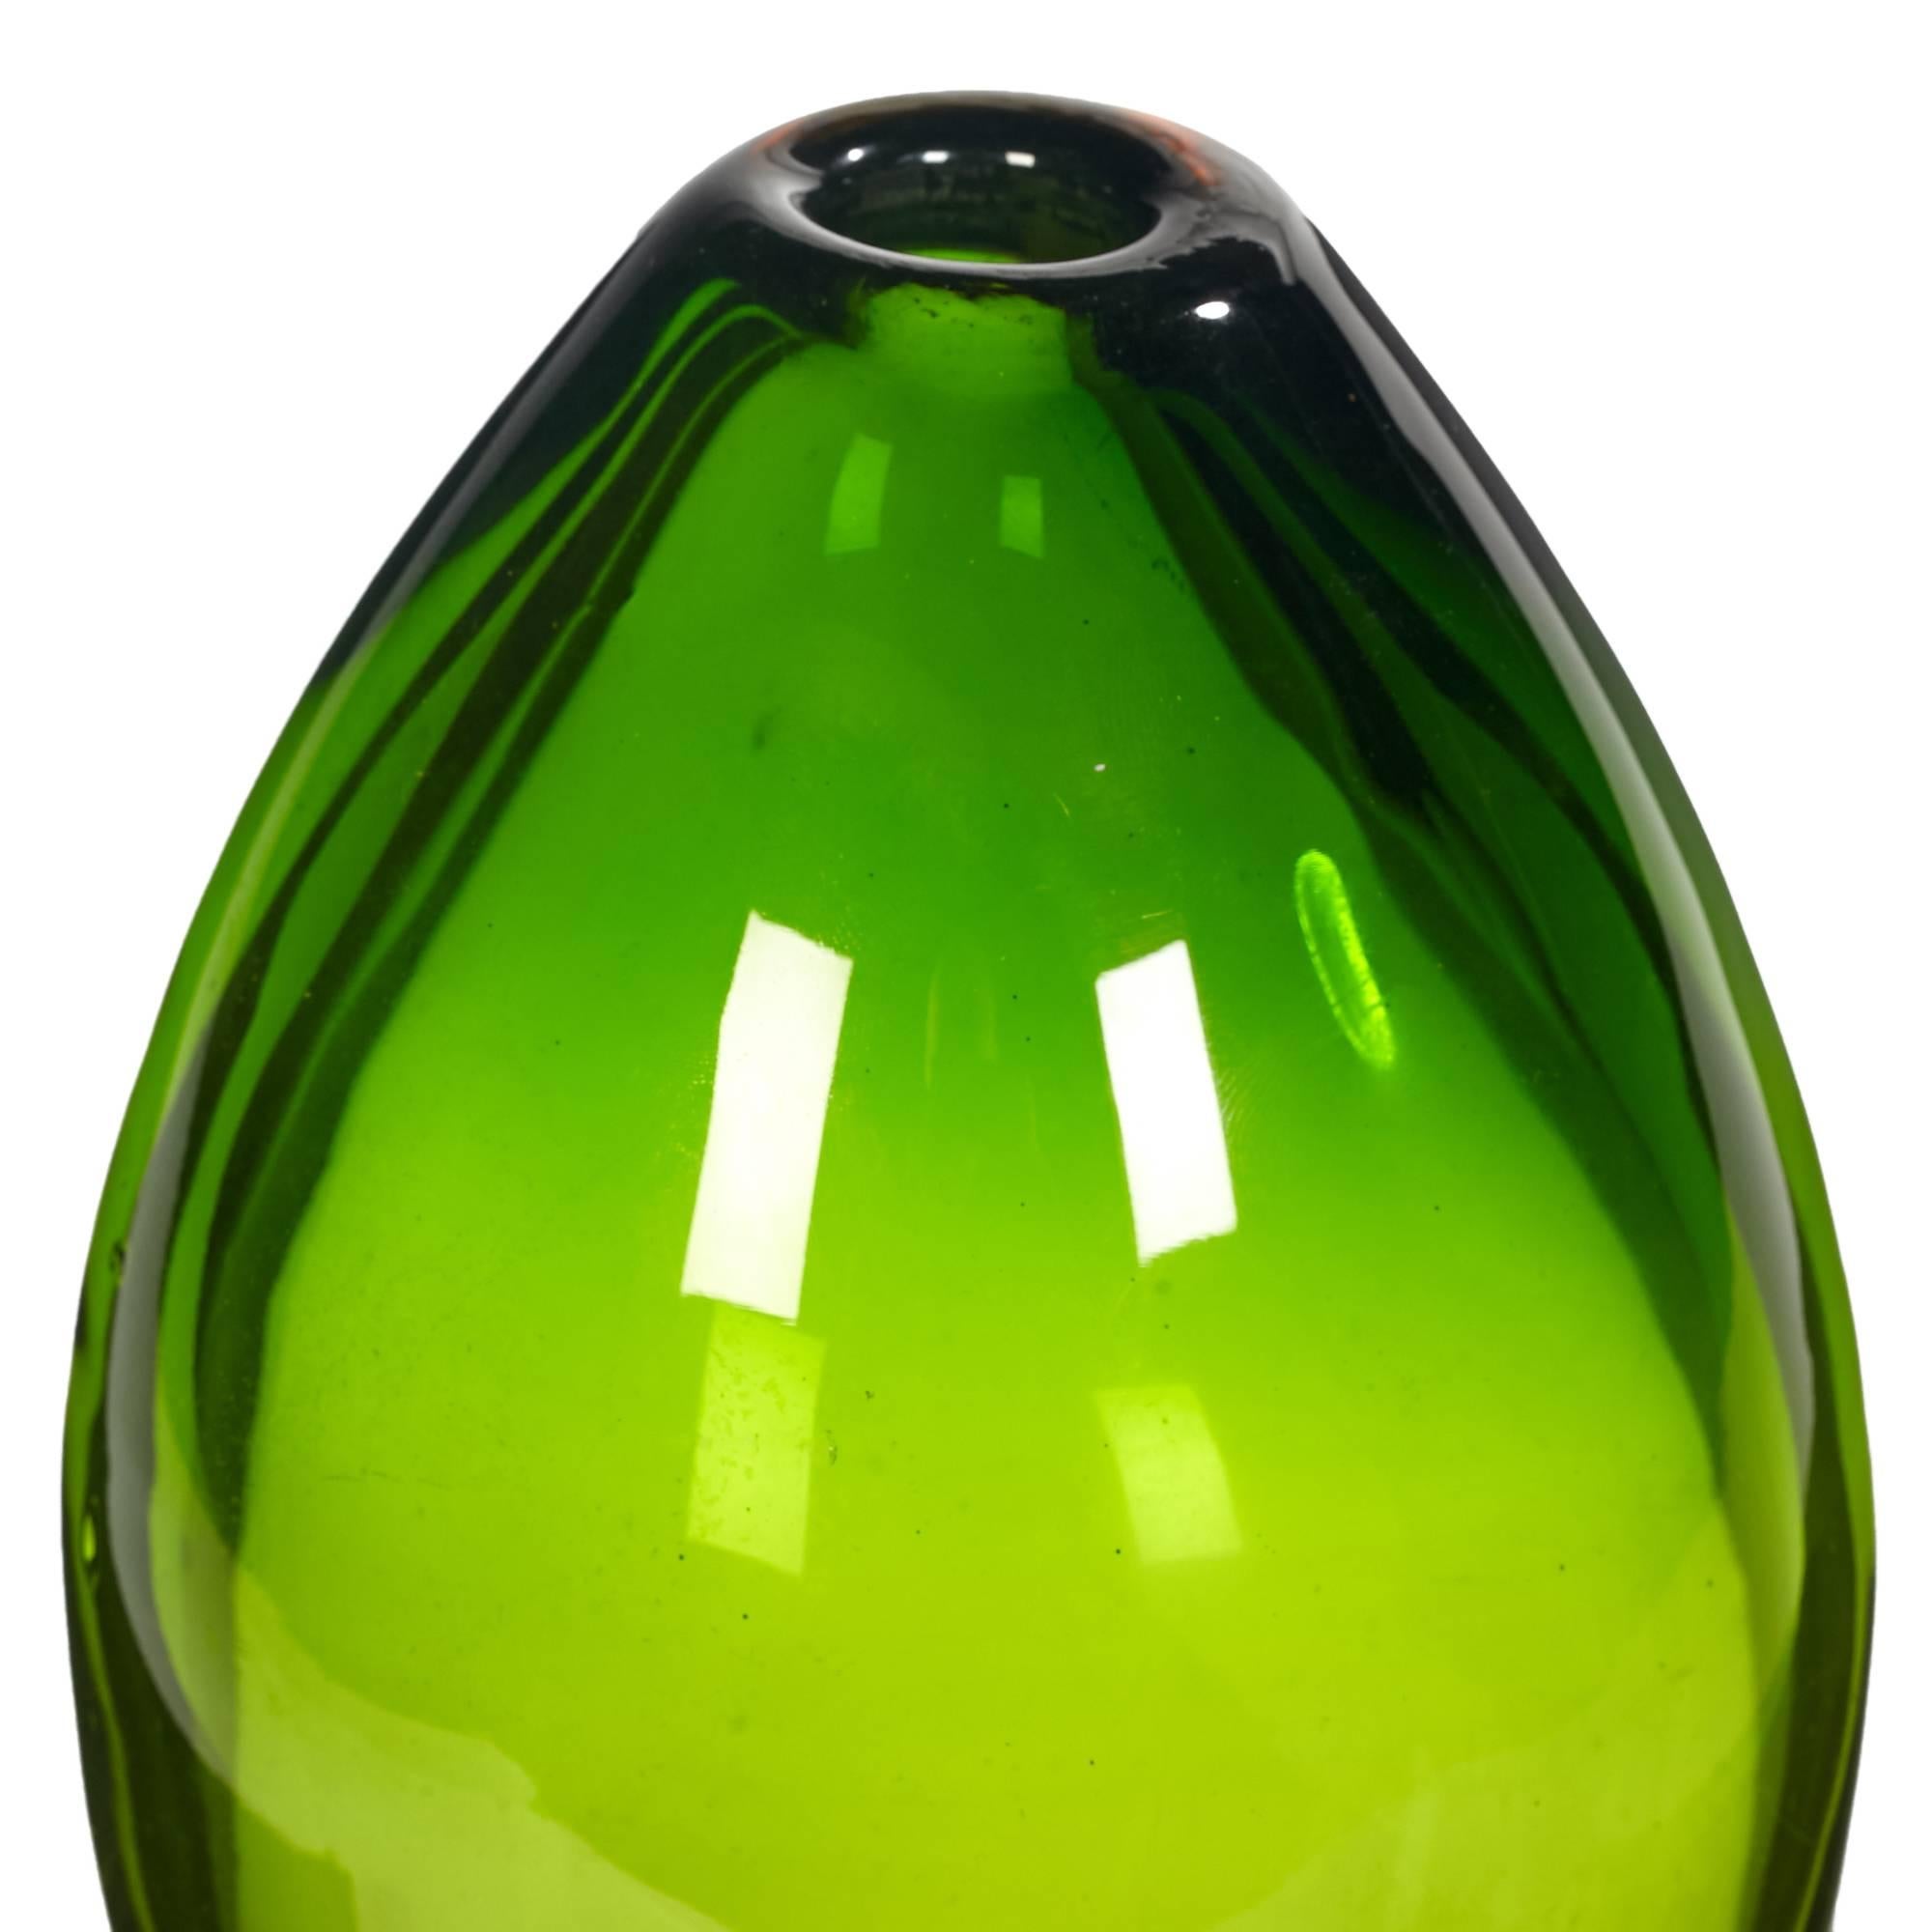 1960s Italian Murano Sommerso green and amber cased glass vase designed by Flavio Poli. Handblown and solid piece of glass, unmarked.